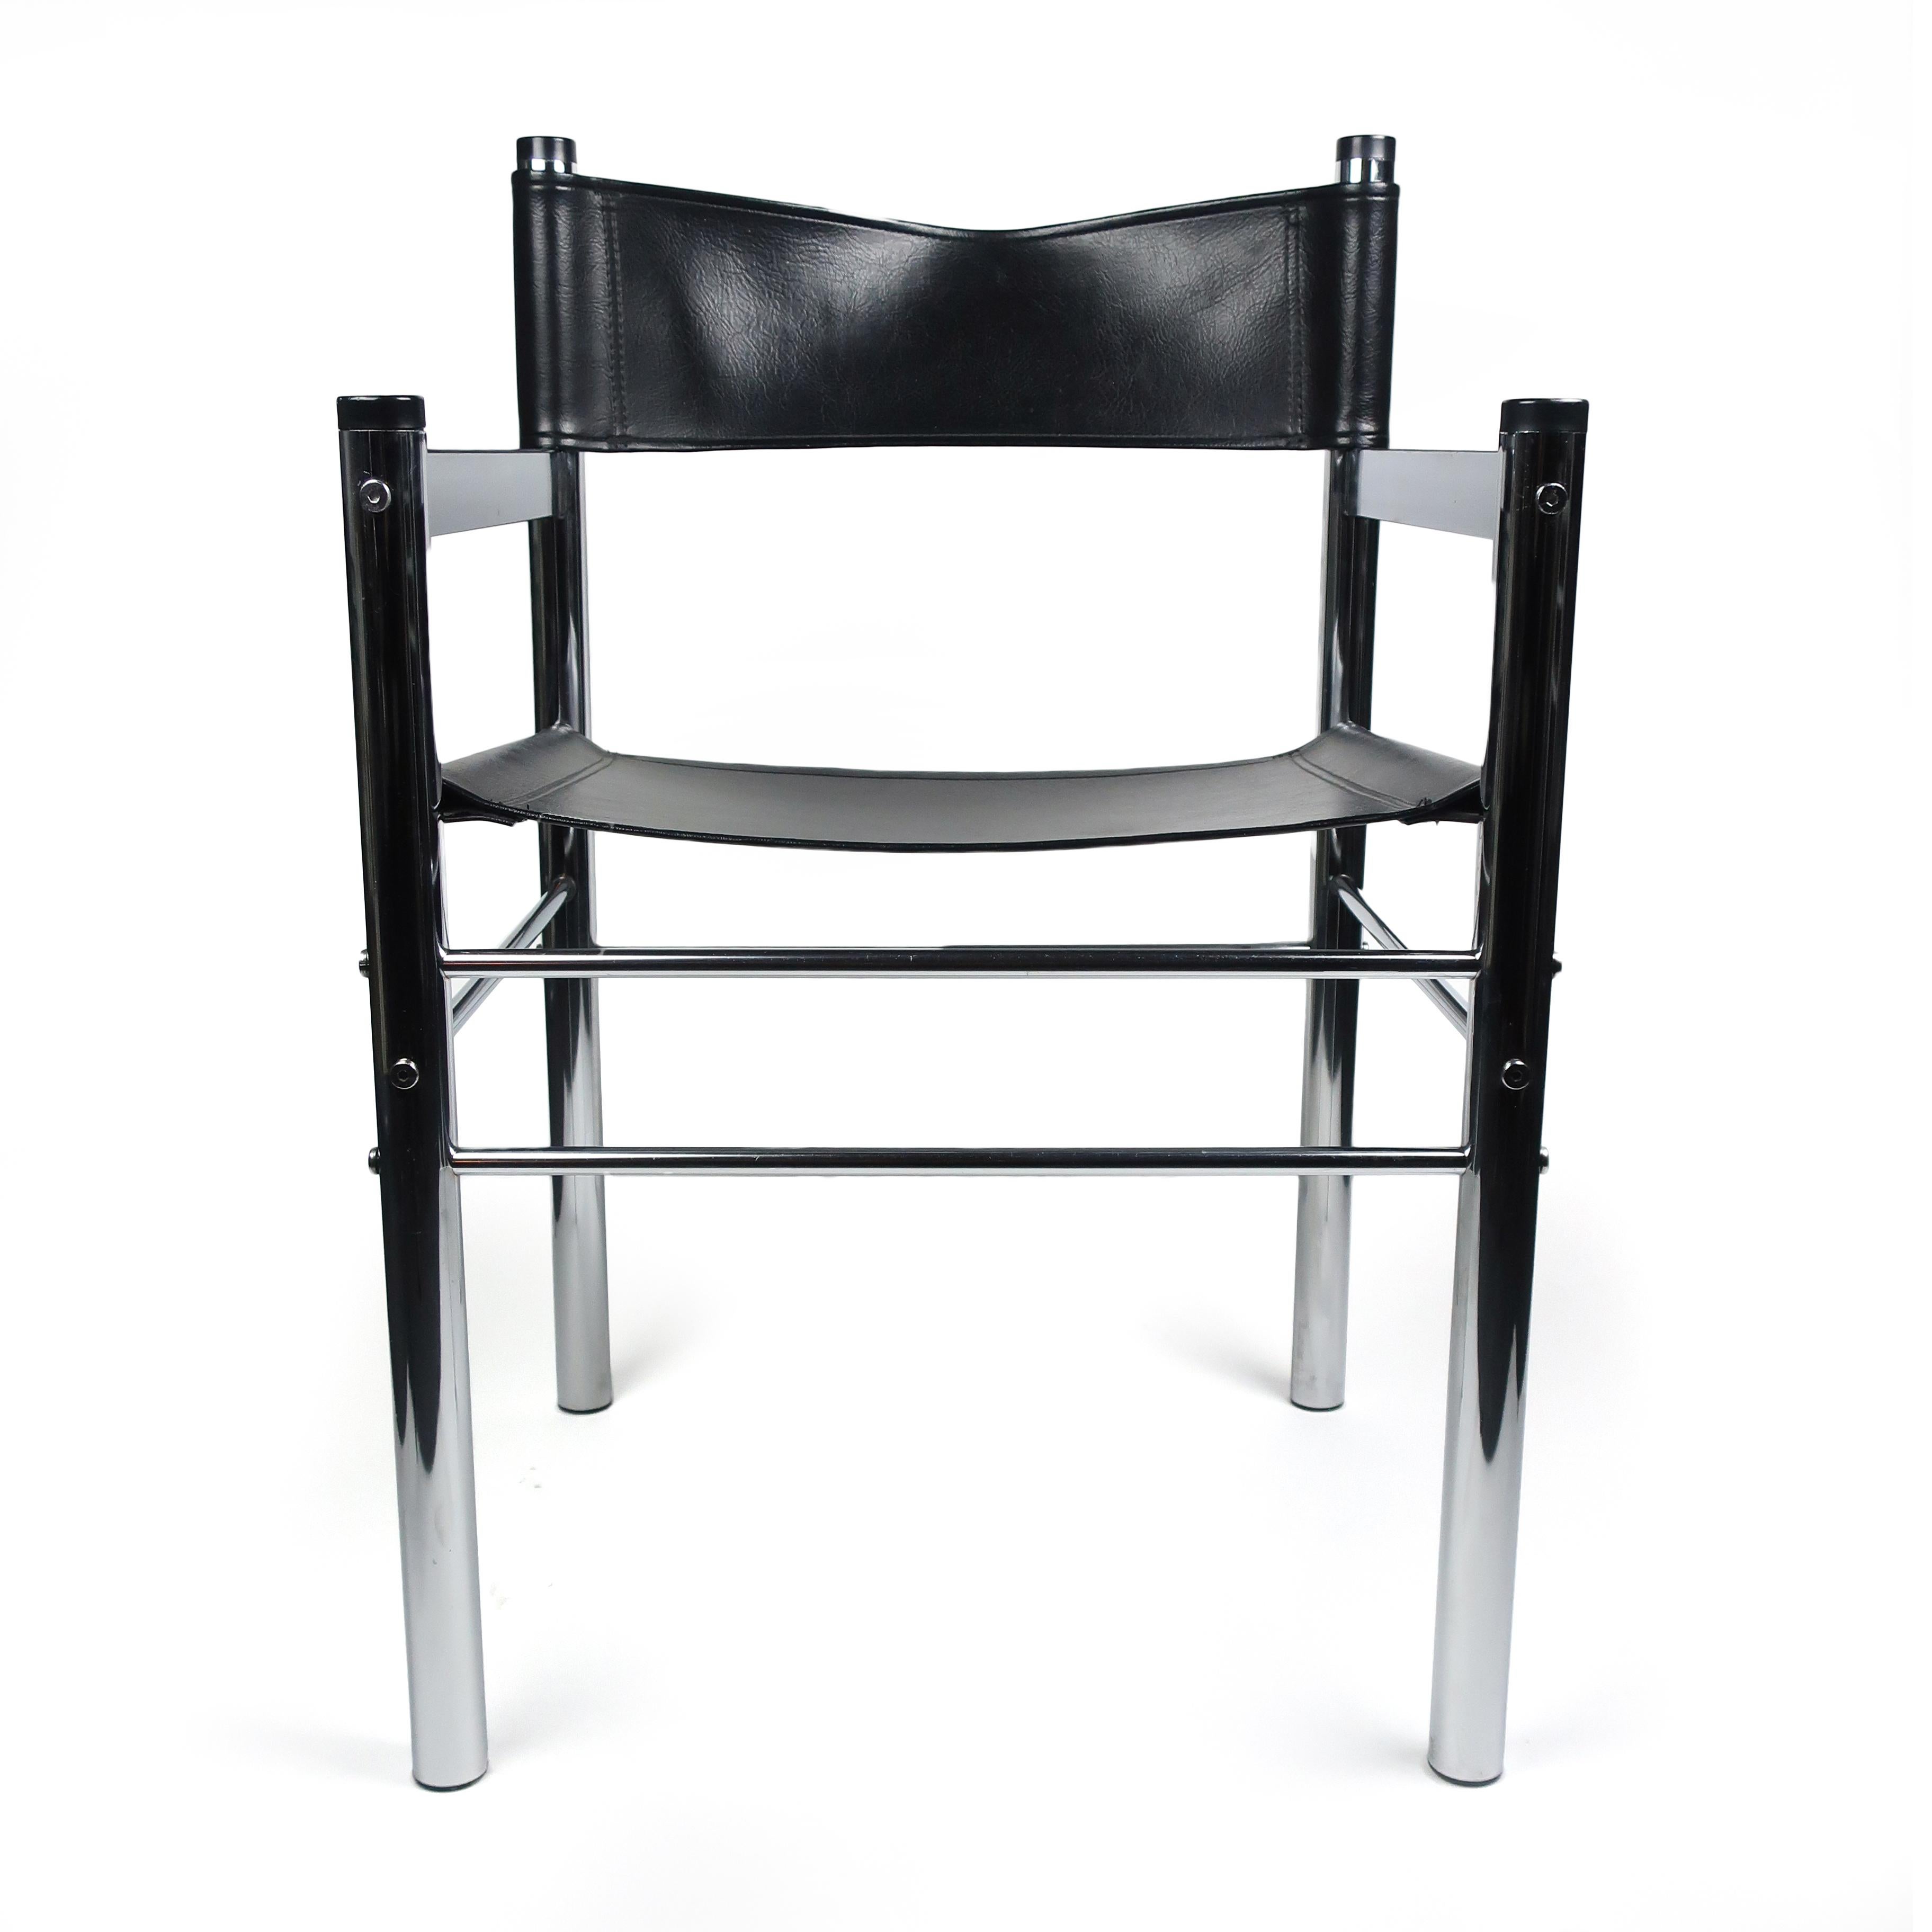 A Minimalist mod chrome and black vinyl armchair designed with four tubular chrome legs and arm rests and a black vinyl sling seat and back.

In excellent vintage condition with wear consistent with age and use.

Measures: 18